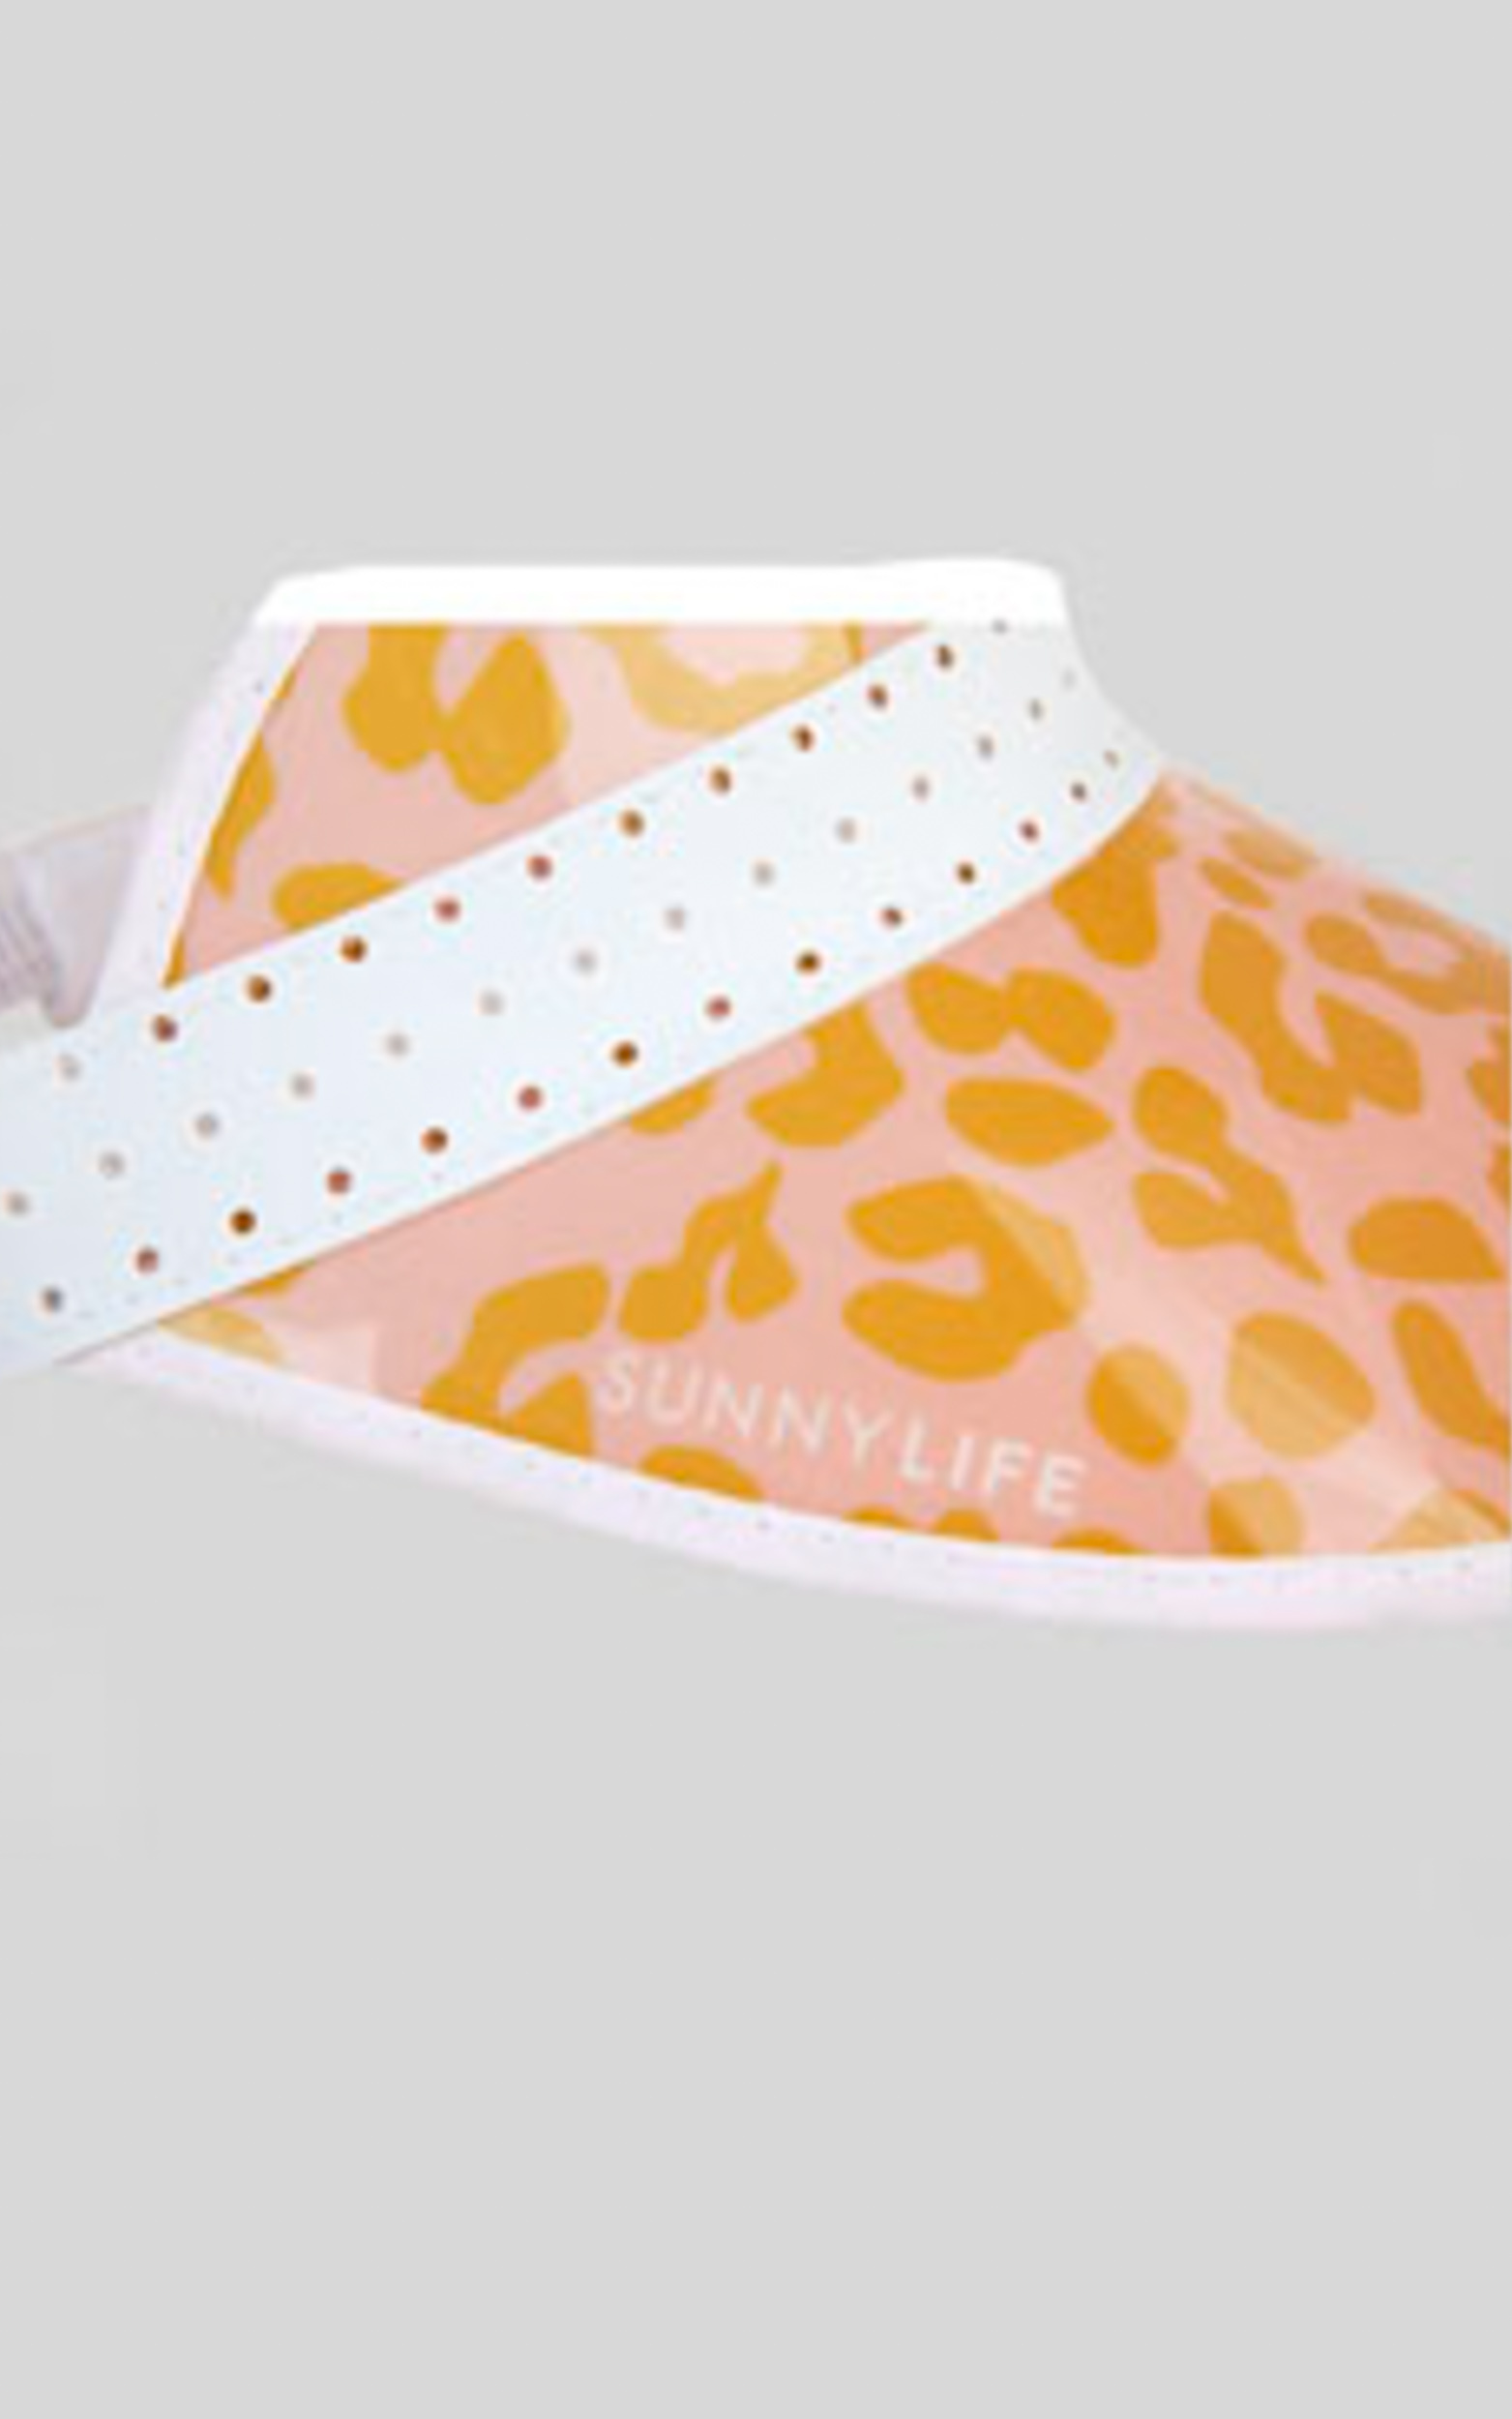 Sunnylife - Retro Visor in Call of the Wild - NoSize, PNK1, hi-res image number null